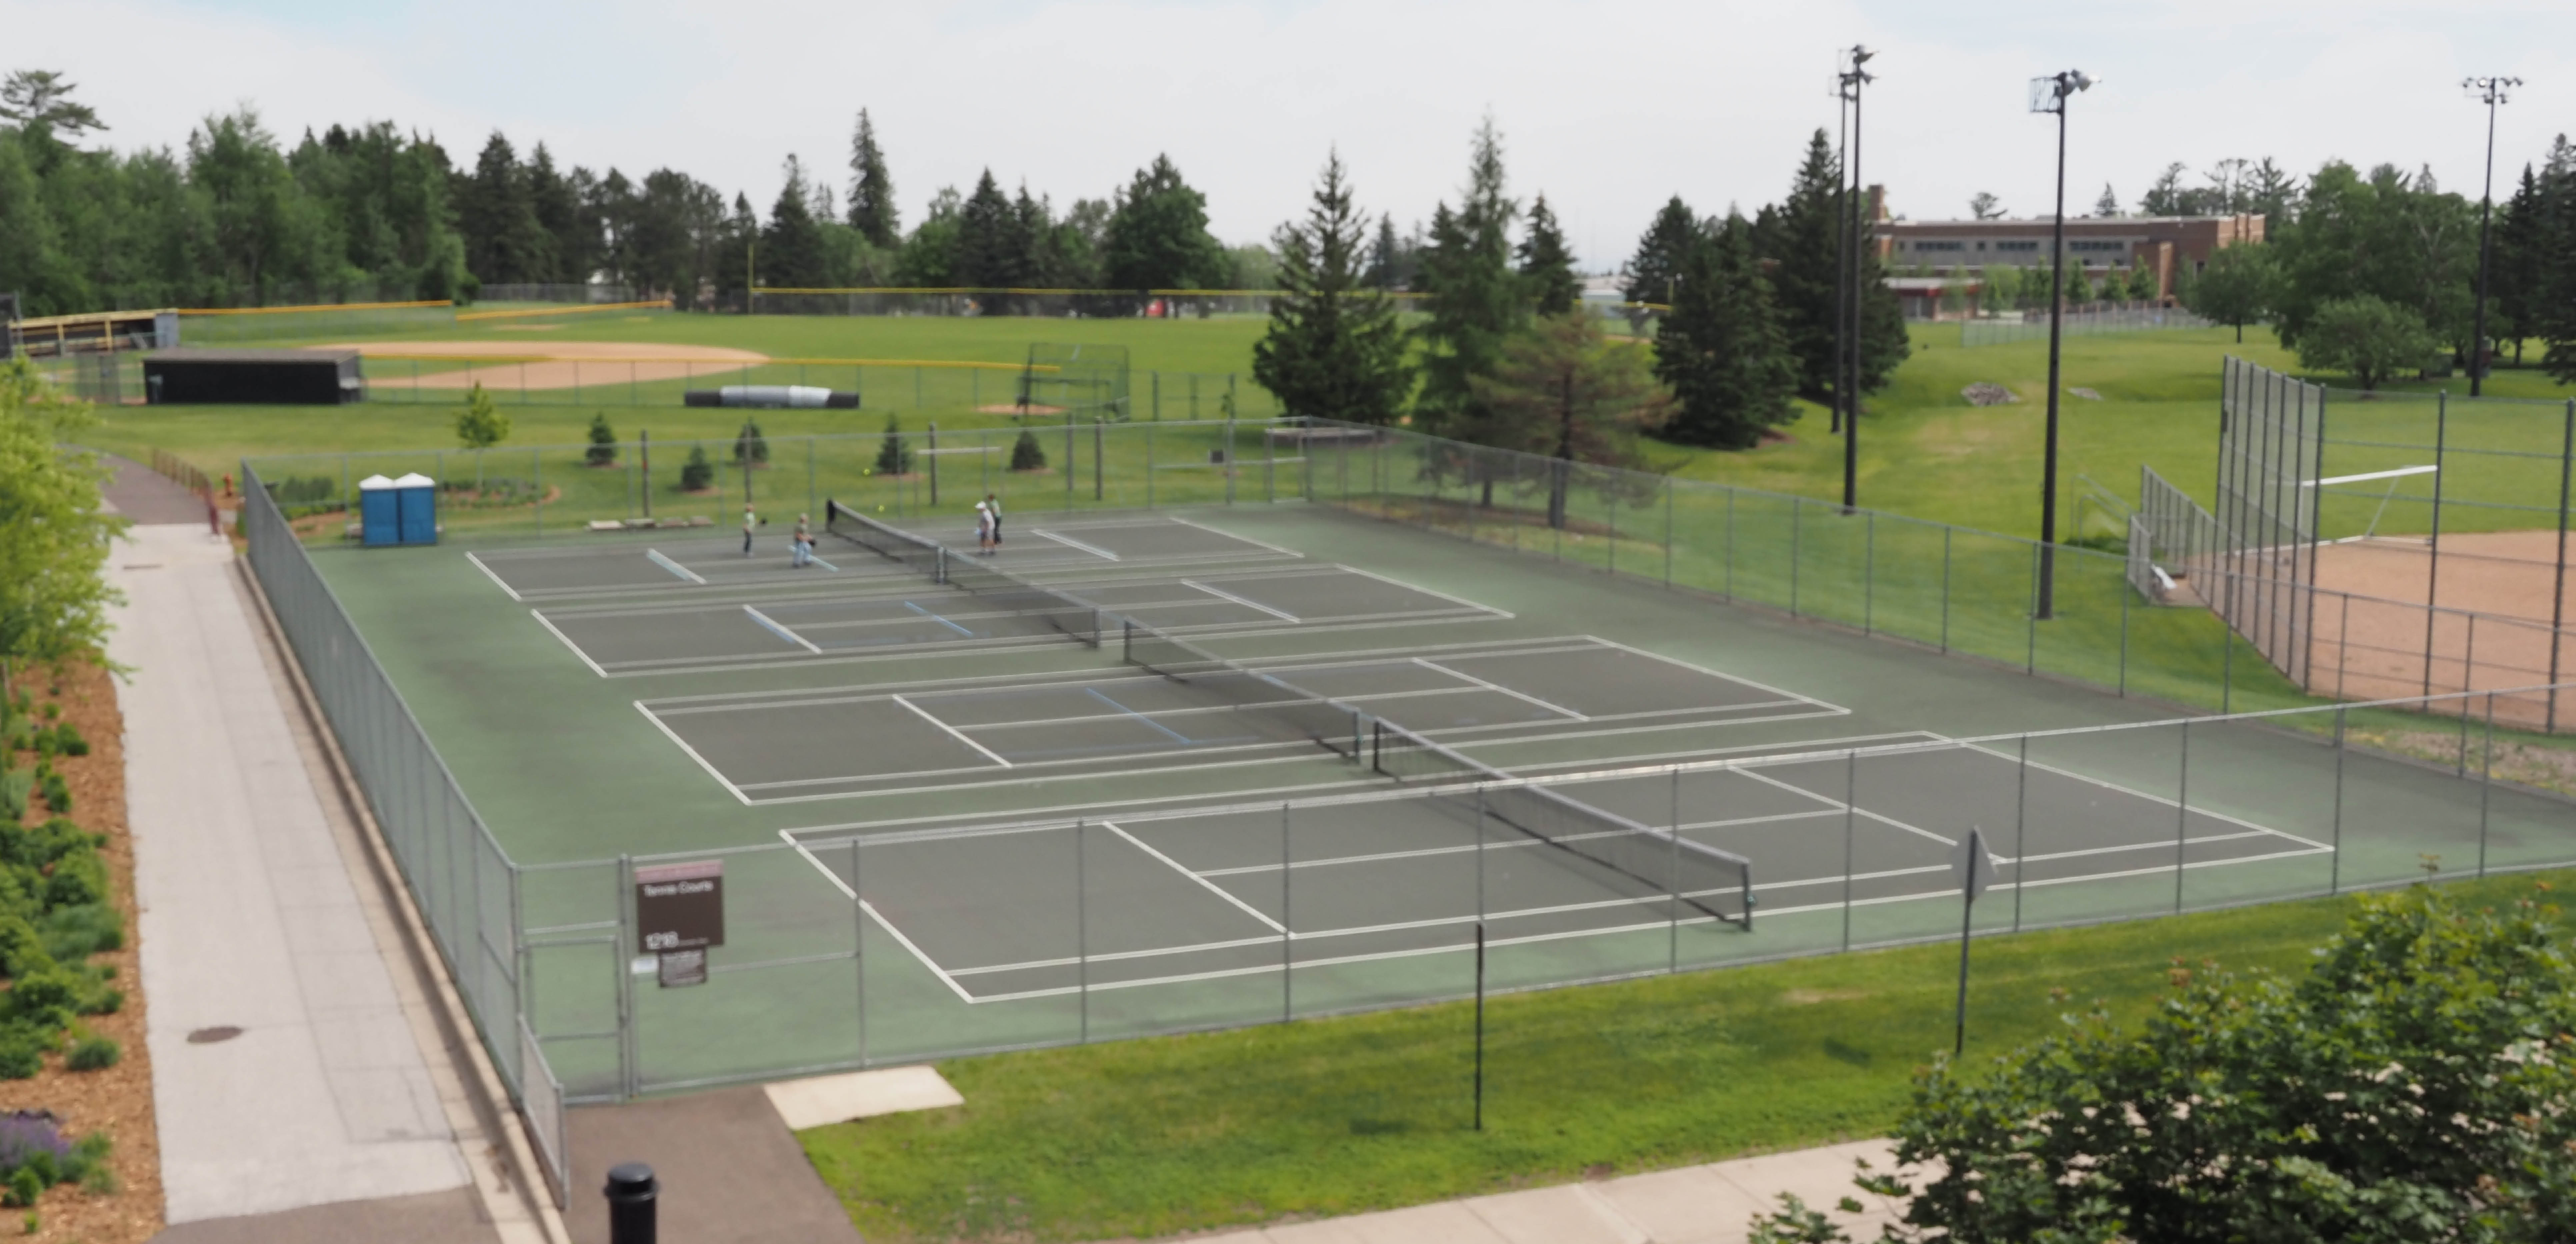 four outdoor tennis courts